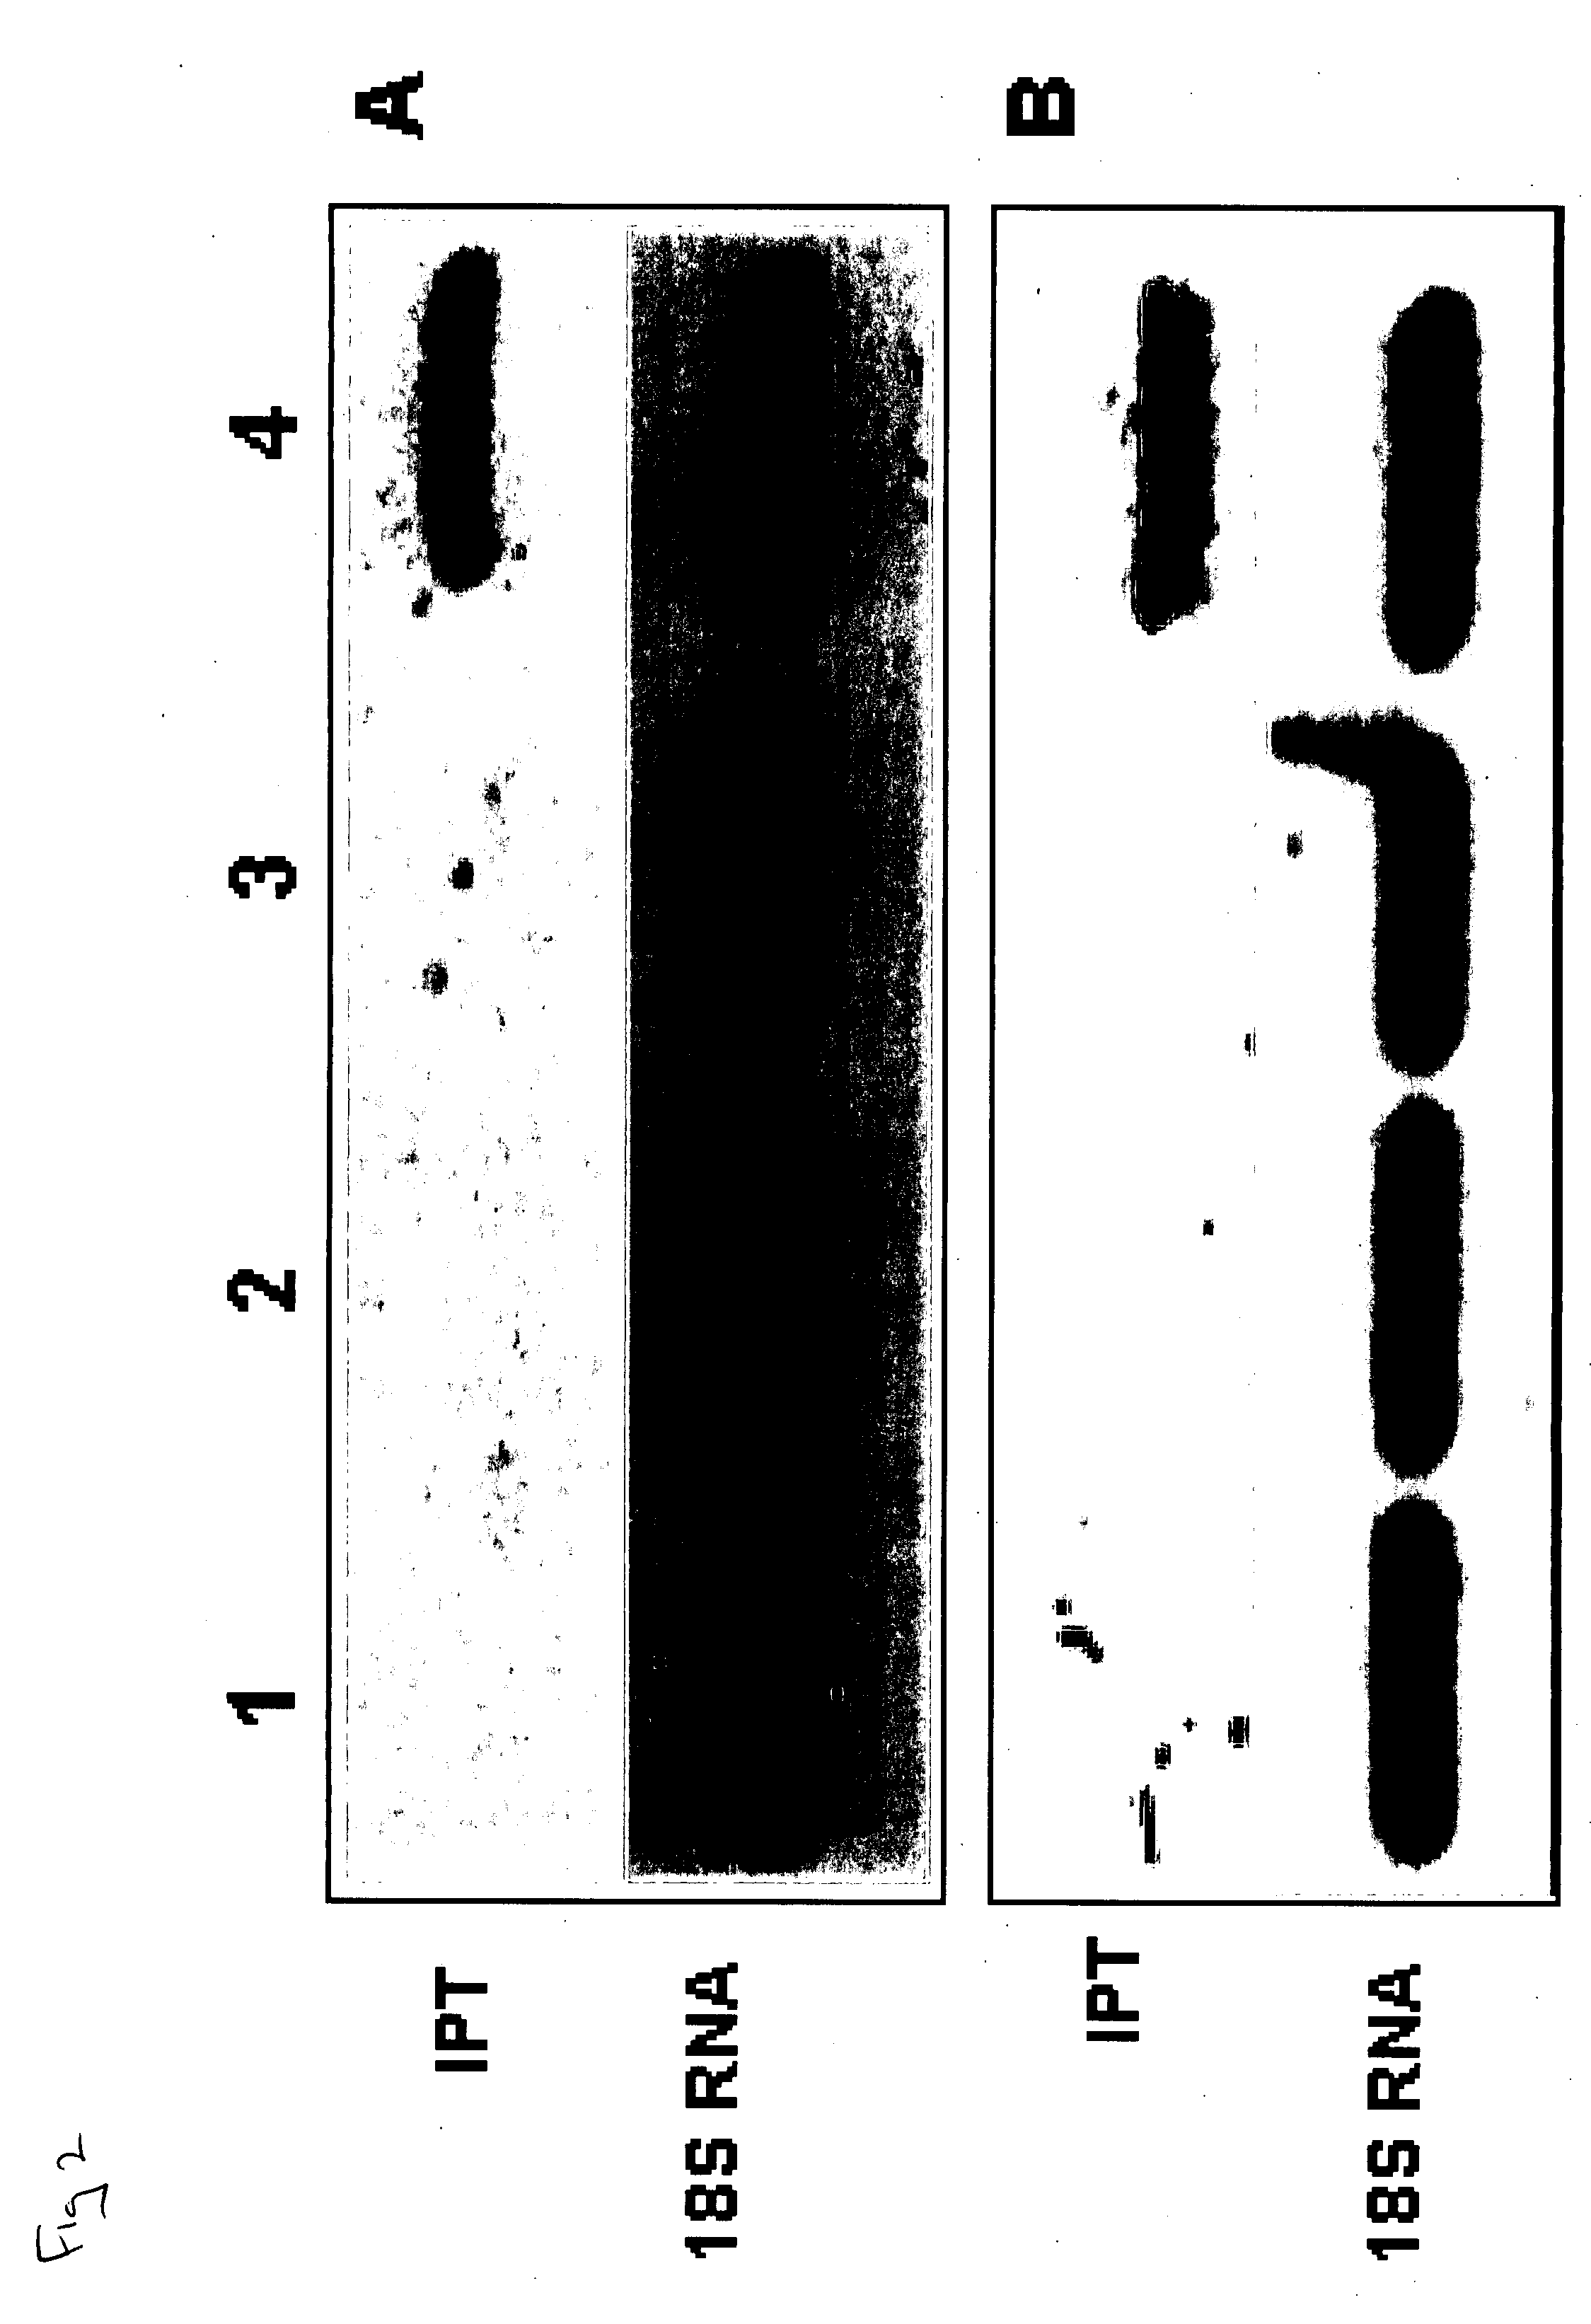 Method and composition for increasing plant survival & viability under cold storage, or dark and cold storage conditions